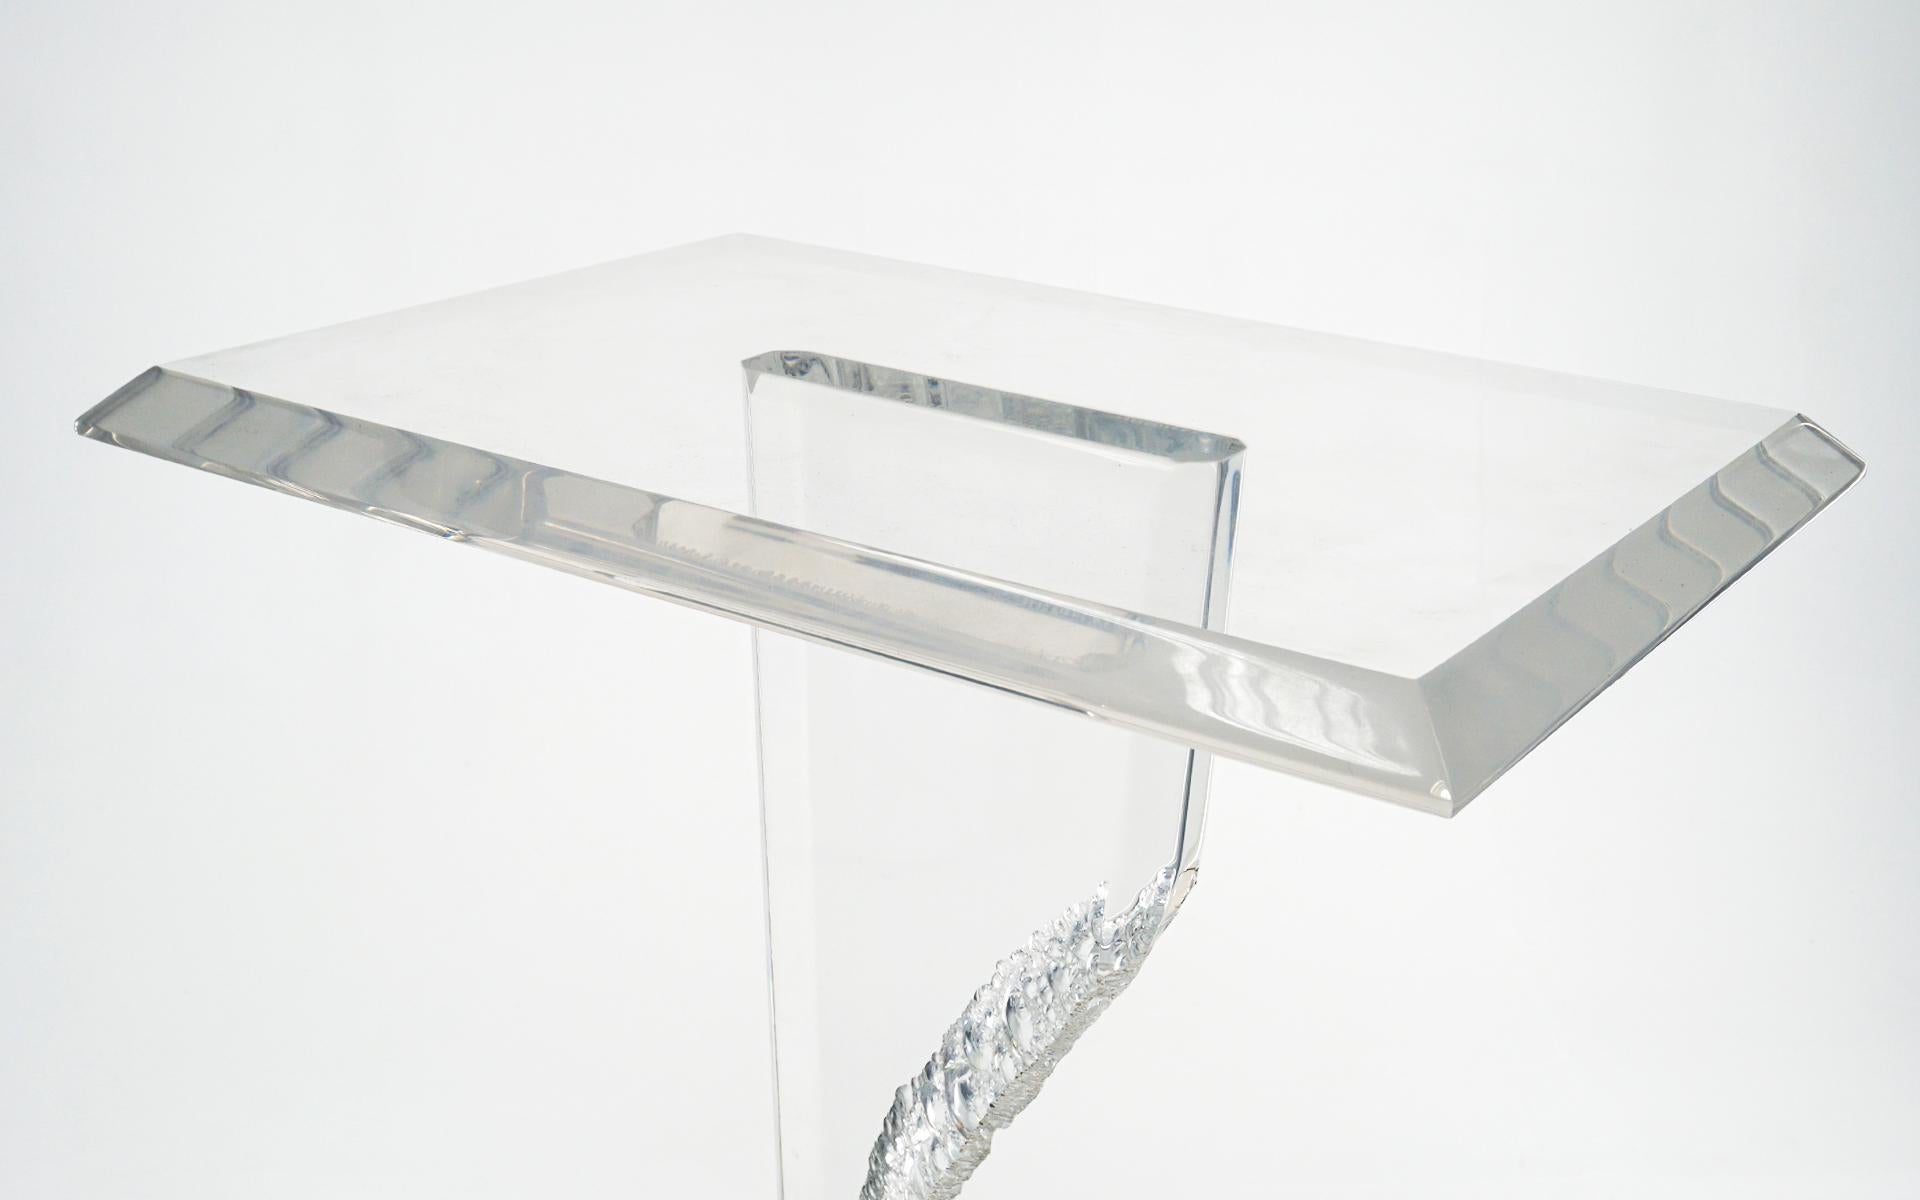 Modern / Contemporary pedestal / display stand in black and clear Acrylic. Very good condition with few if any signs of use. Very well made and sturdy. One inch thick clear lucite support cut in an abstract irregular form. The acrylic top is free of